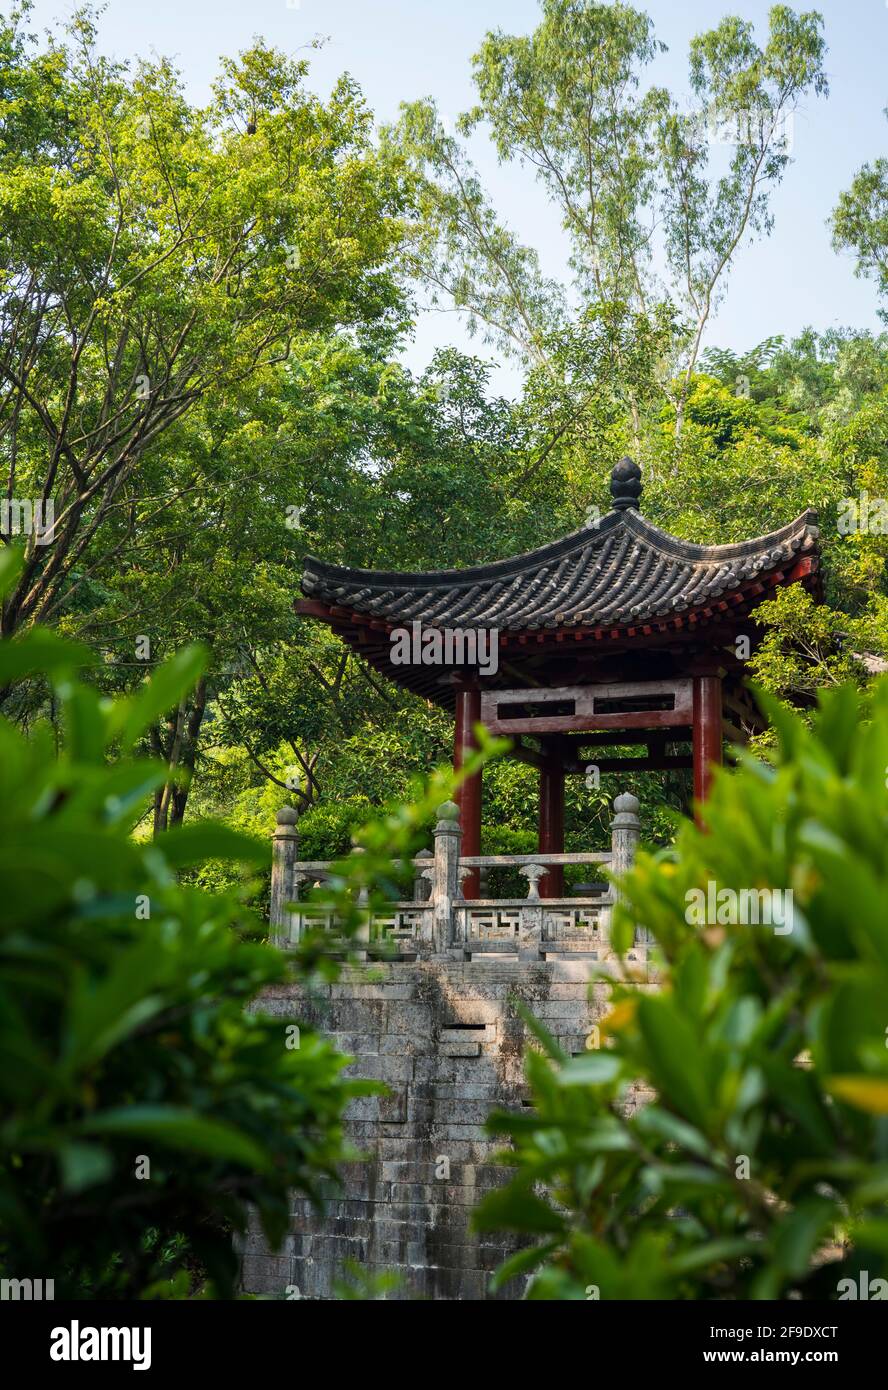 Shenzhen, China. October, 2019. The pavilion at Cangtai Garden in Shenzhen International Garden and Flower Expo Park. The park serves multiple functio Stock Photo